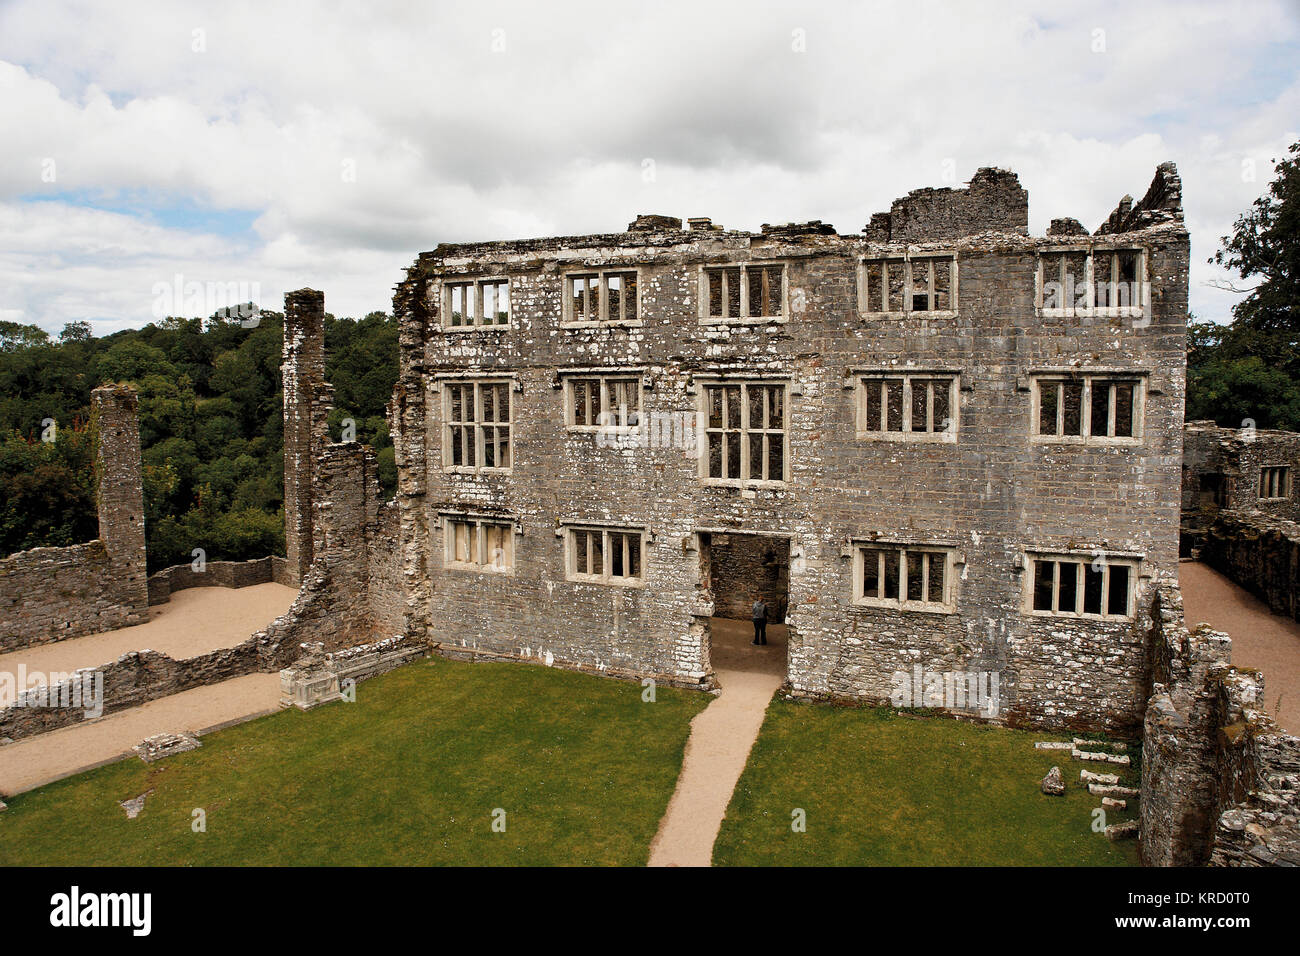 Part of the ruins of Berry Pomeroy Castle near Totnes in Devon.  Much construction work was undertaken during the 15th and 16th centuries, but the building was abandoned by 1700, and is reputed to be haunted.       Date: 2009 Stock Photo